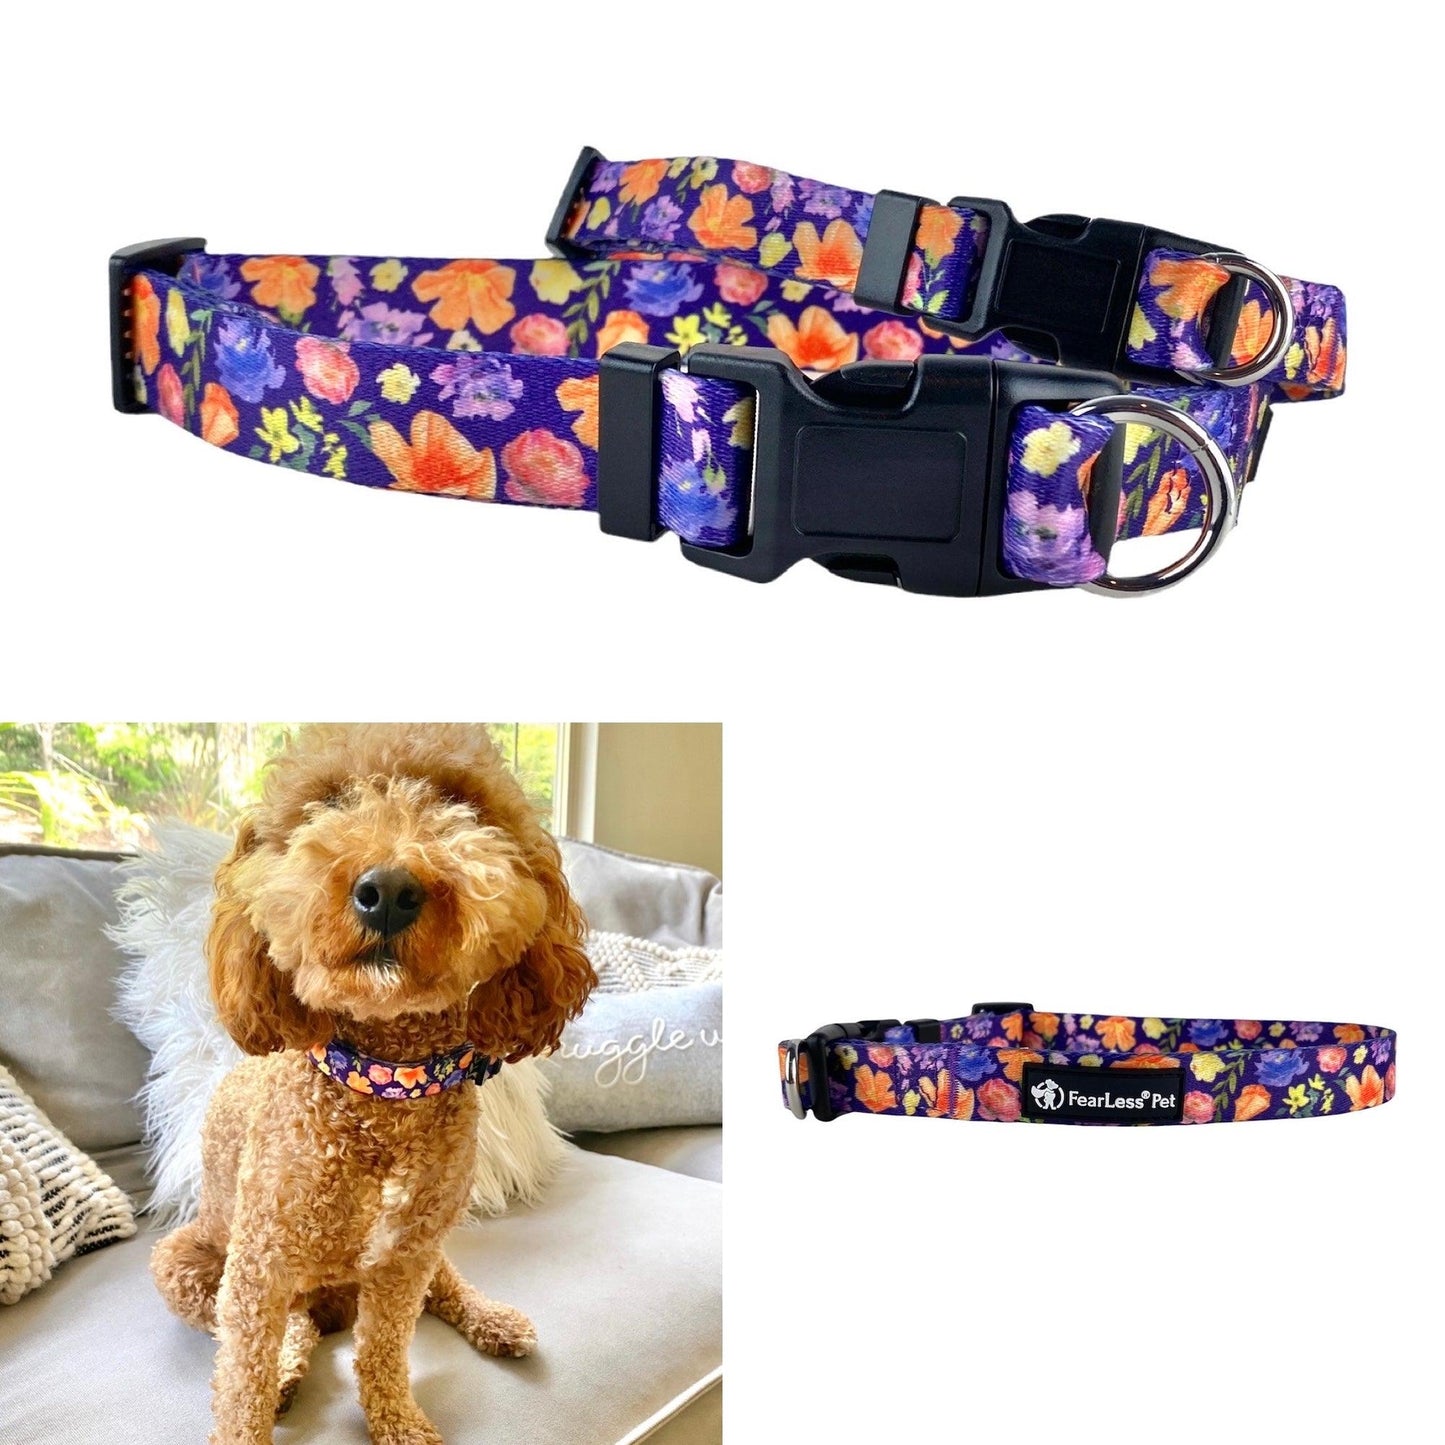 NEW! Safe Cinch Collar, No Escape No Choke Dog Collar by Fearless Pet - Purple Poppies - FearLess Pet